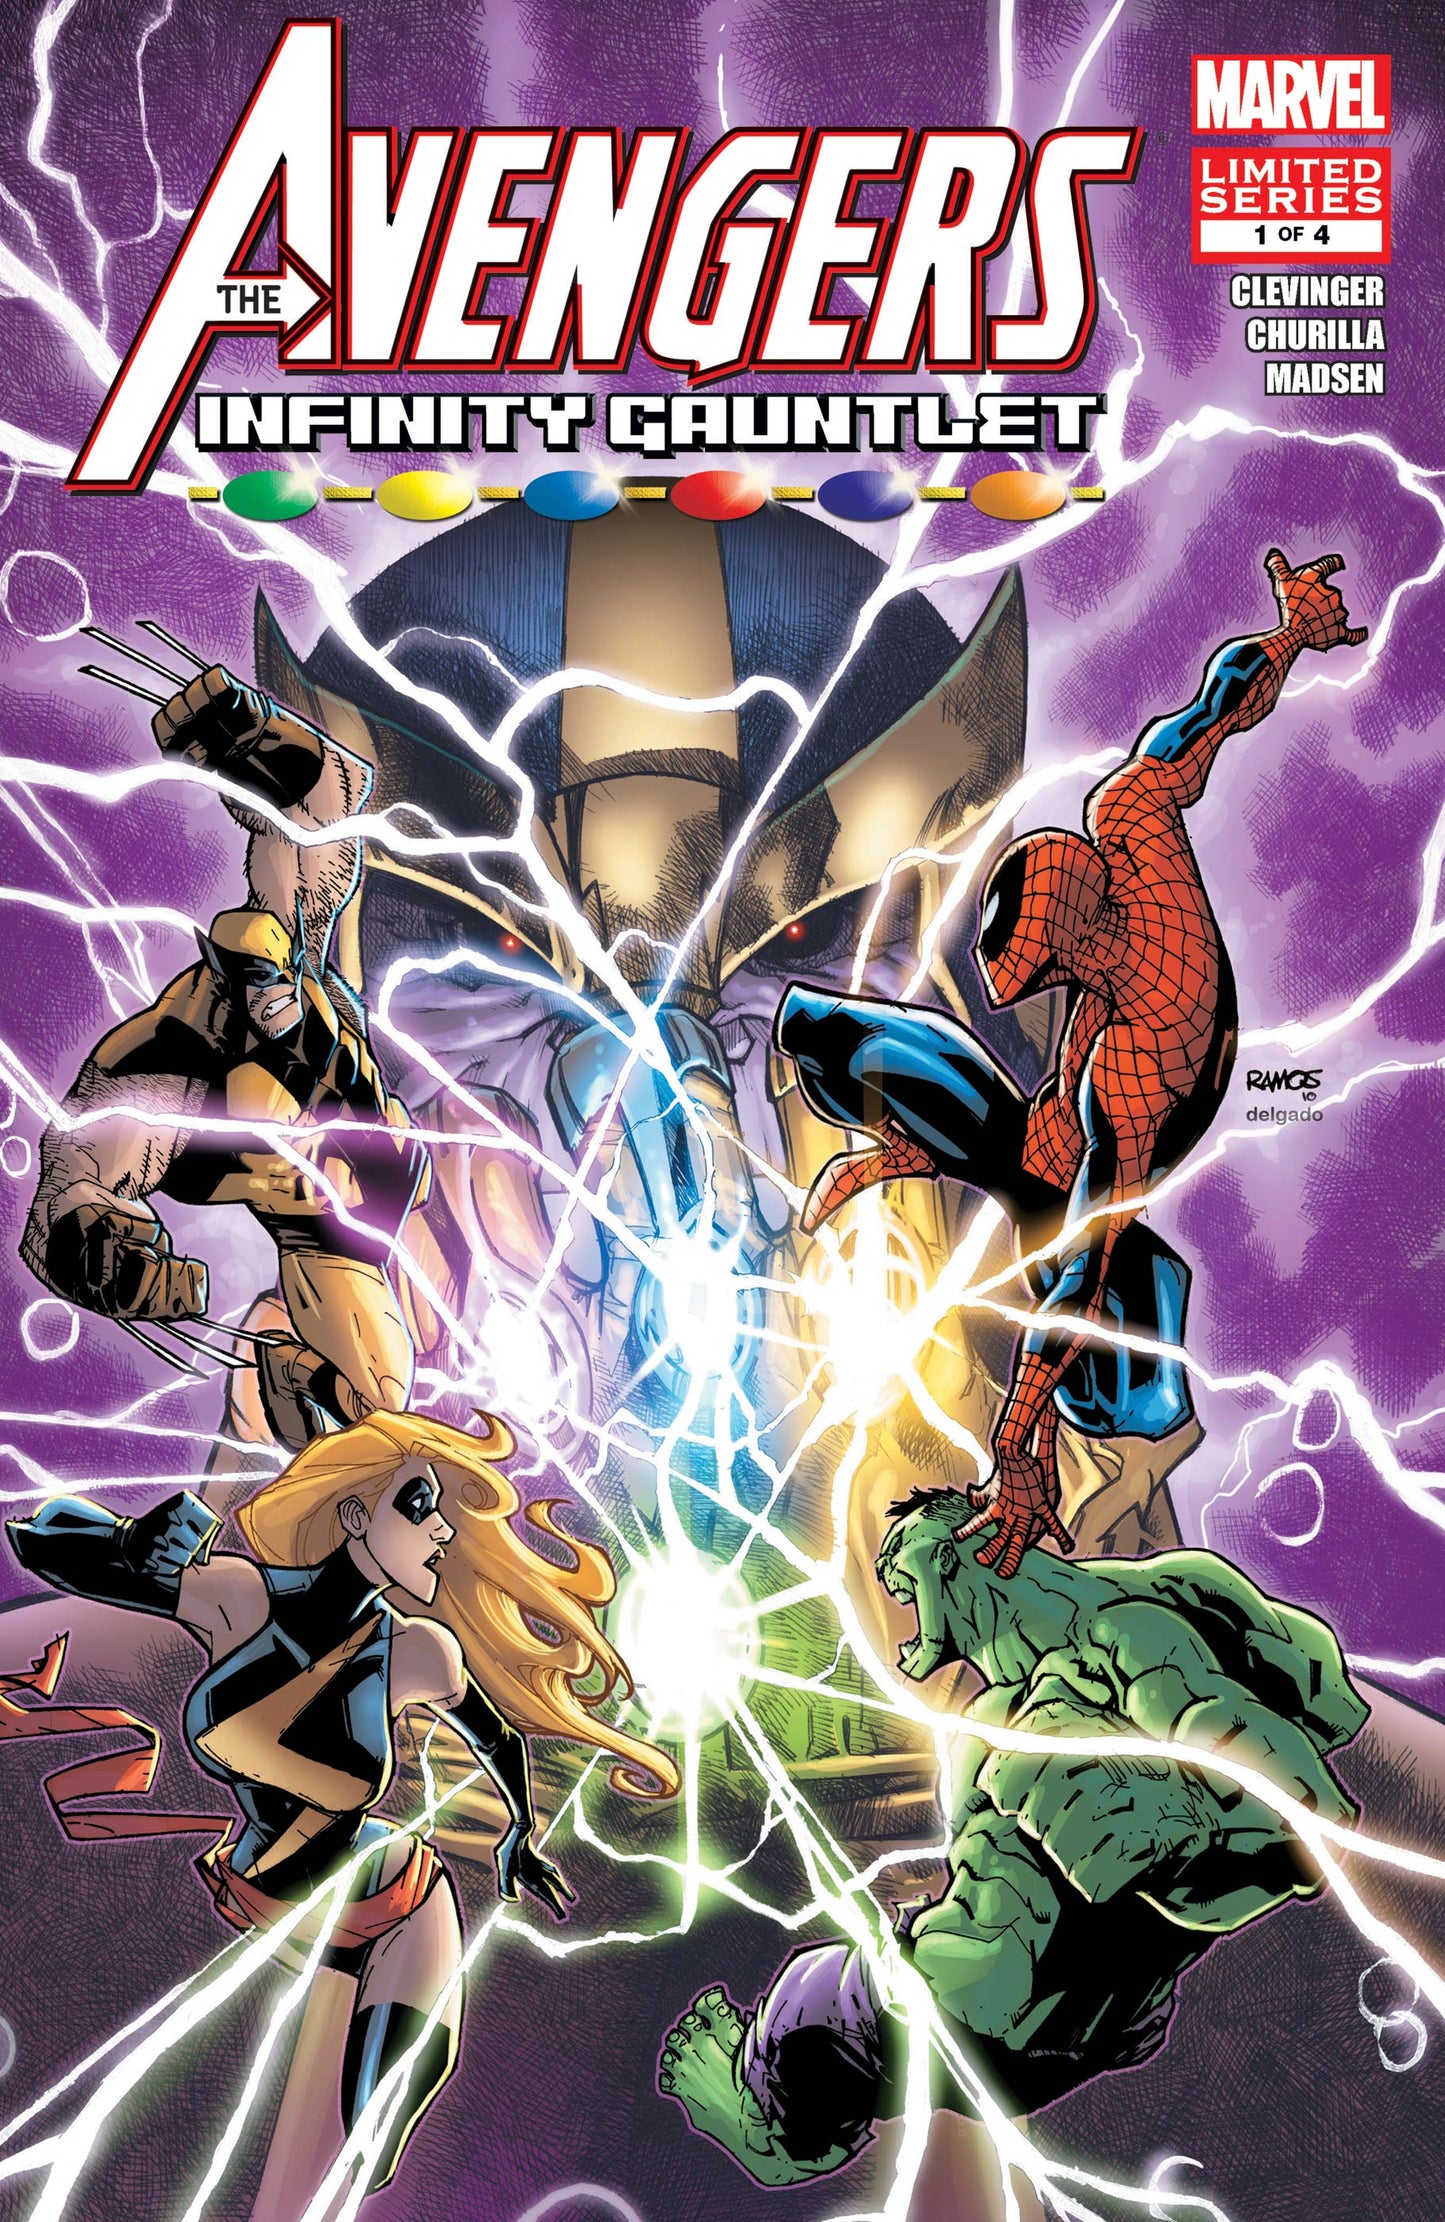 Avengers and the Infinity Gauntlet (2010) #1